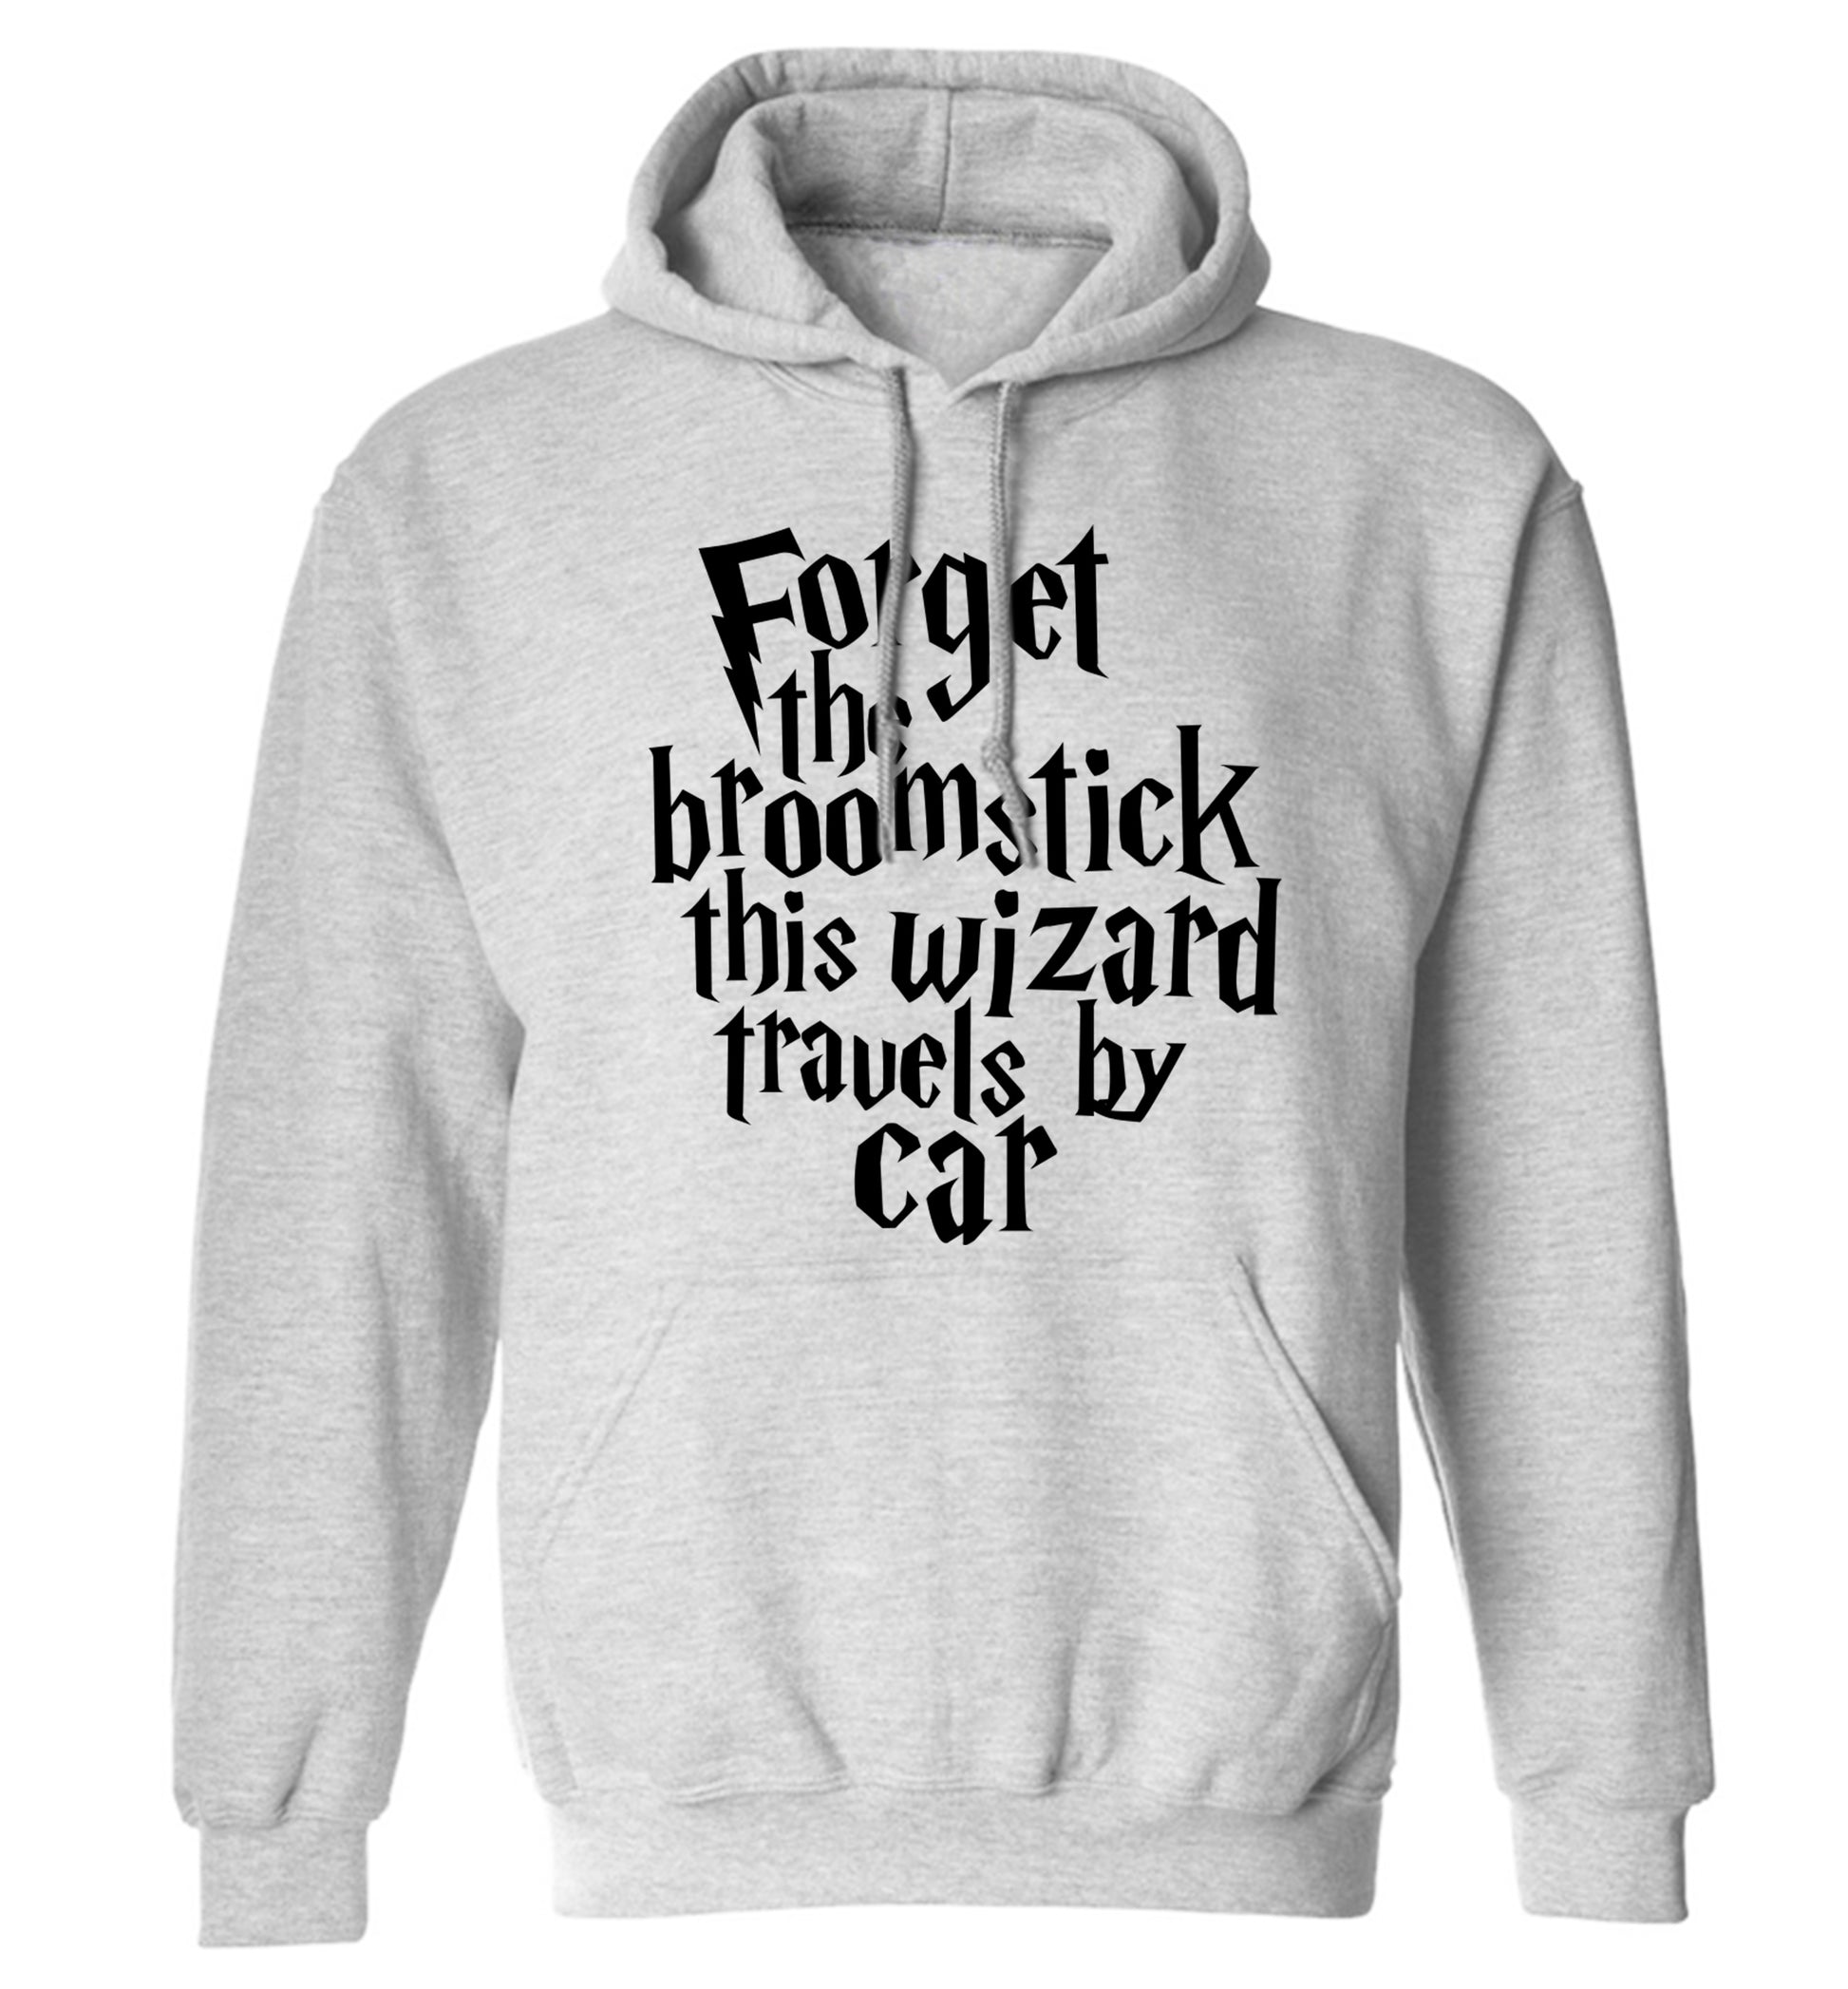 Forget the broomstick this wizard travels by car adults unisexgrey hoodie 2XL